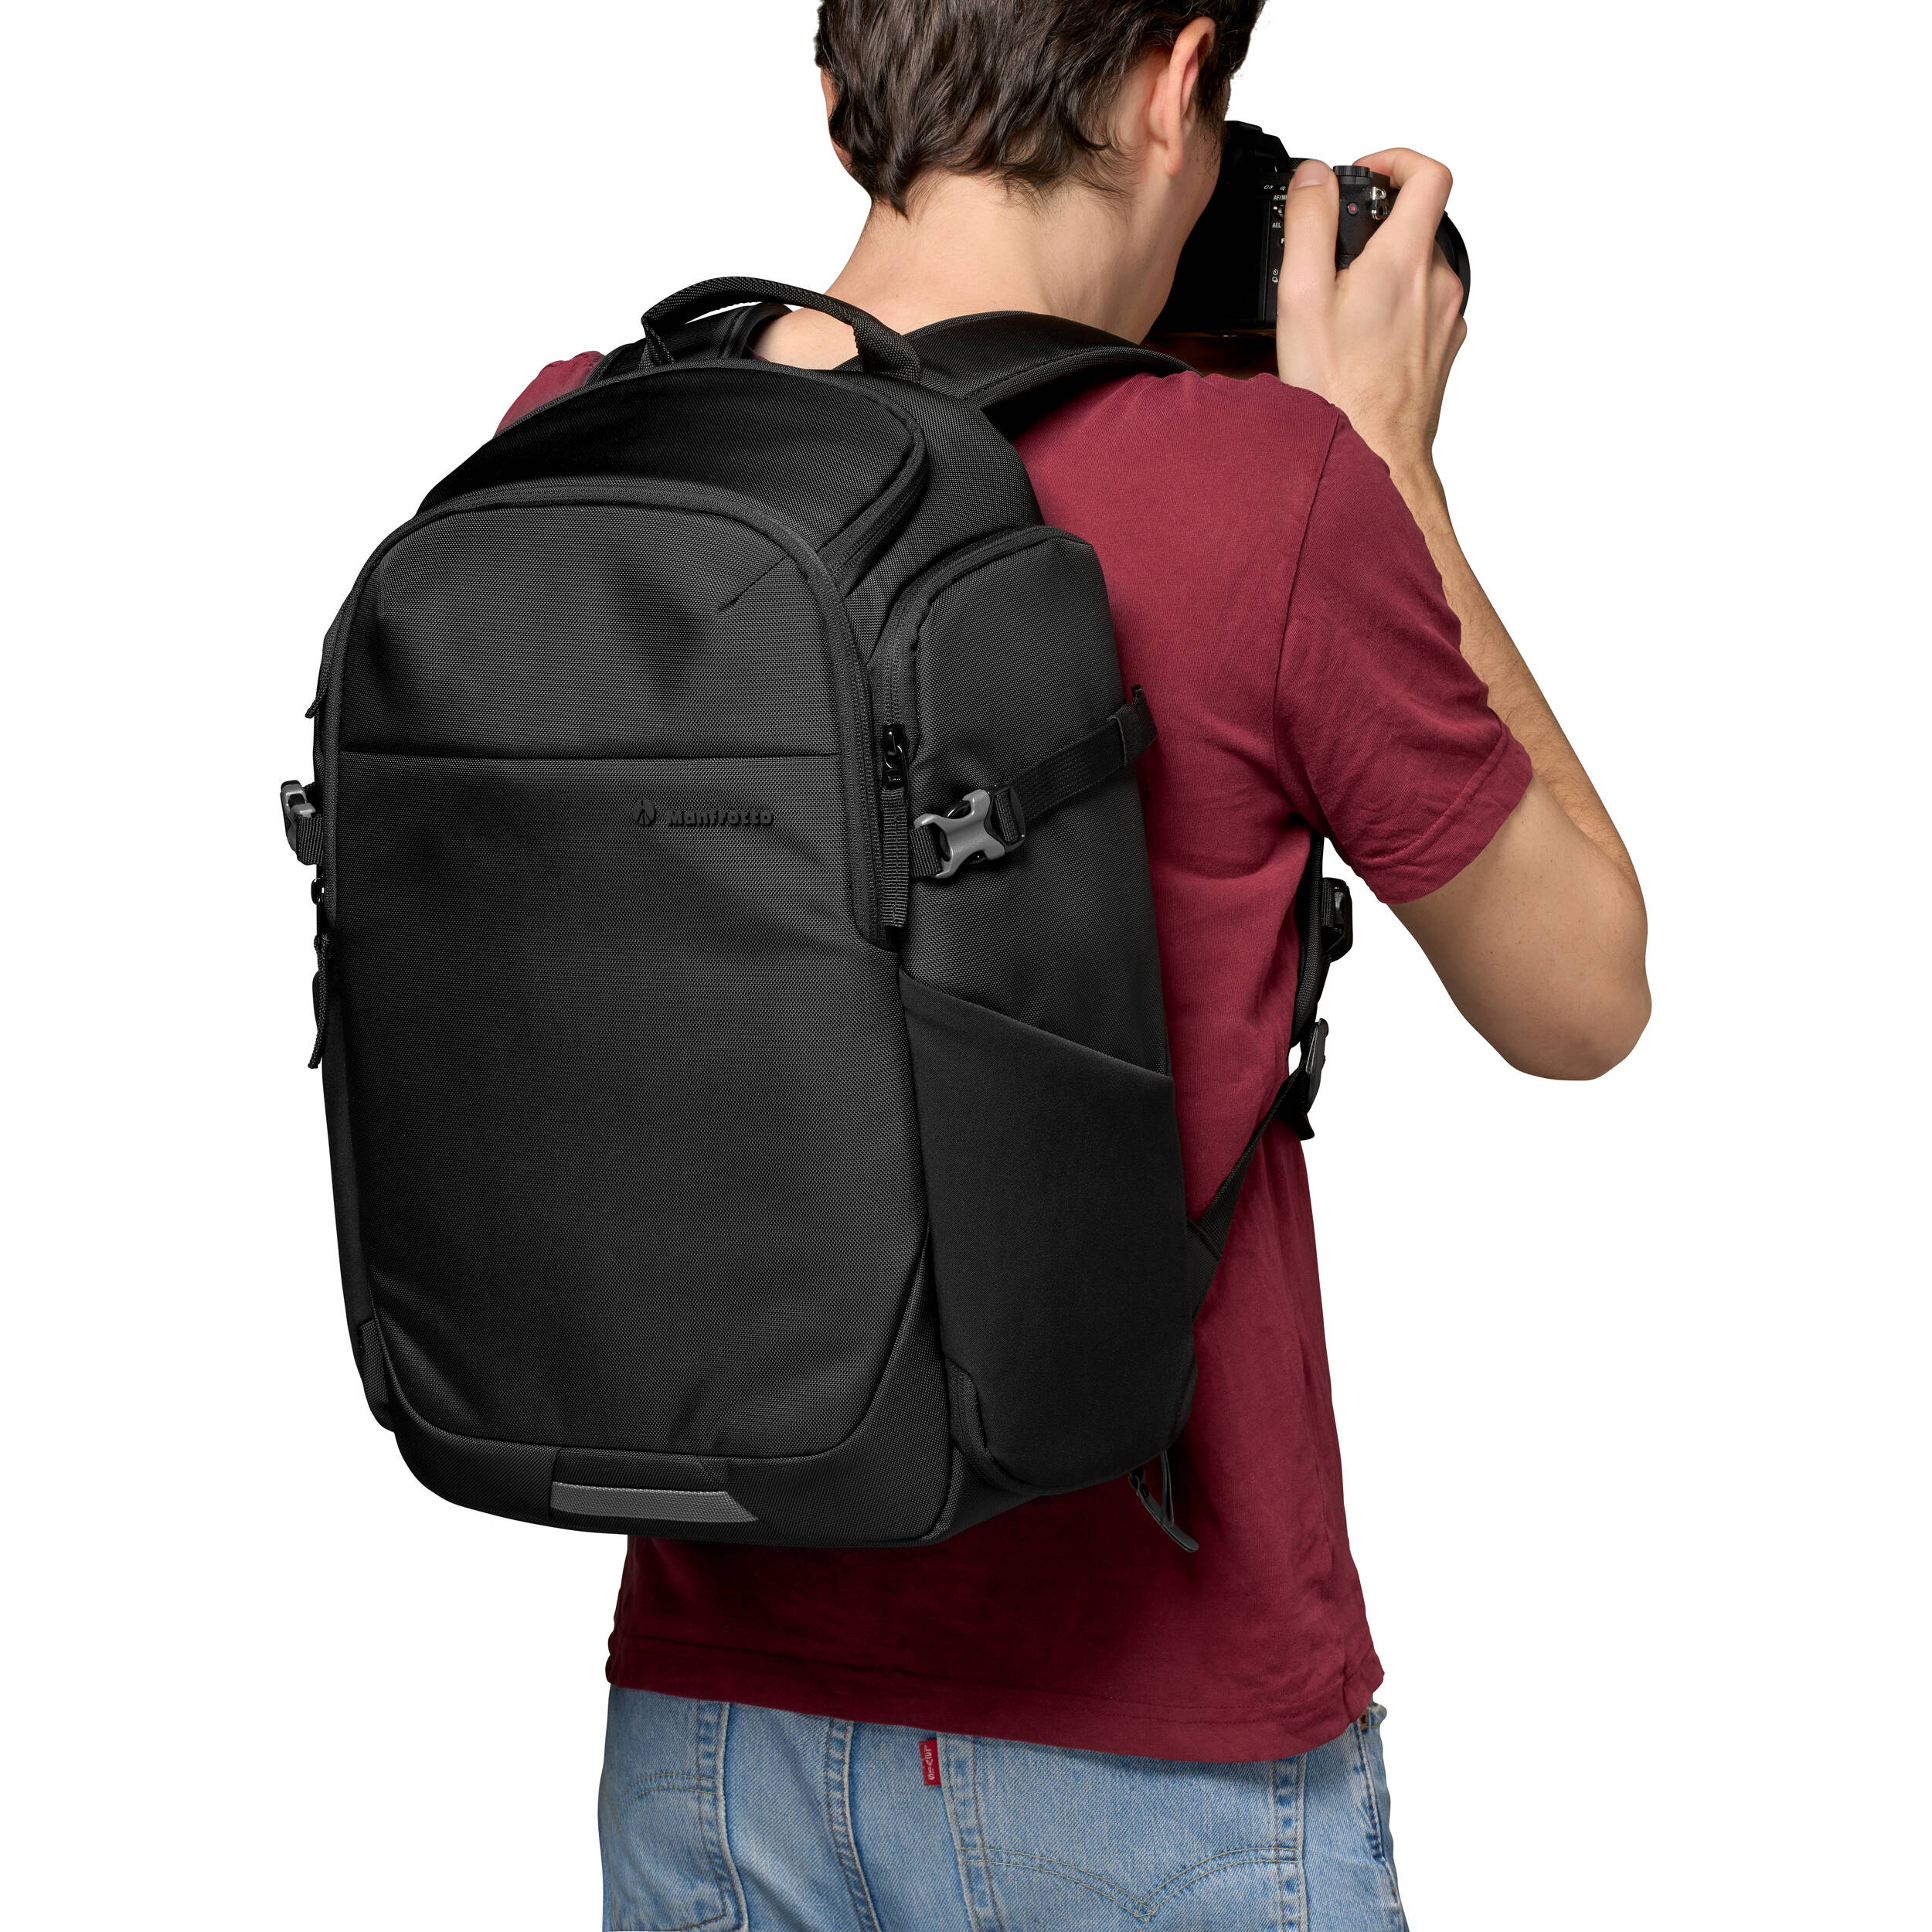 Bag Manfrotto. Backpack Advanced Befree III